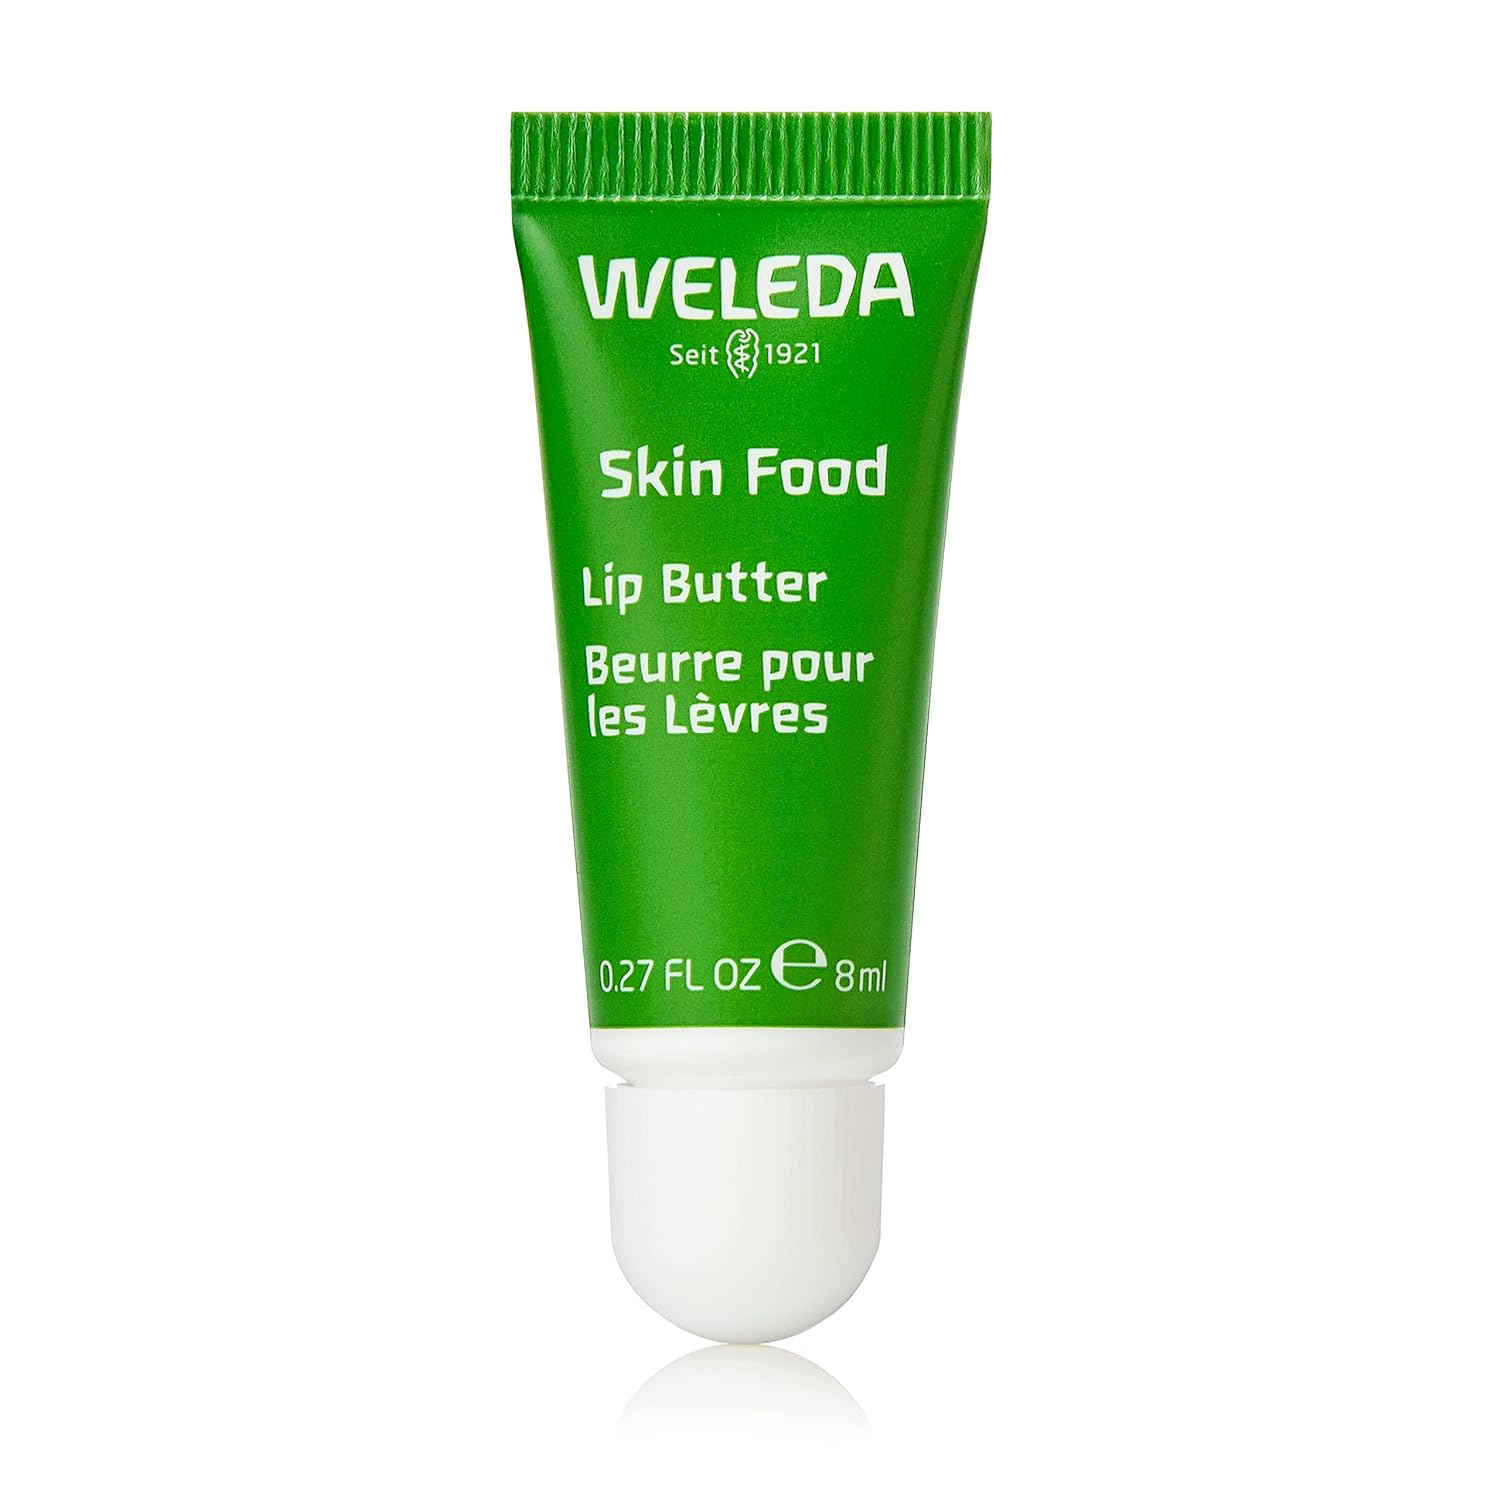 Weleda Skin Food Hydrating Duo, 2.5 Fluid Ounce Skin Food Original Body Cream Skin Food, 0.27 Fluid Ounce Skin Food Lip Butter, Plant Rich Moisturizer with Pansy, Chamomile and Calendula : Beauty & Personal Care